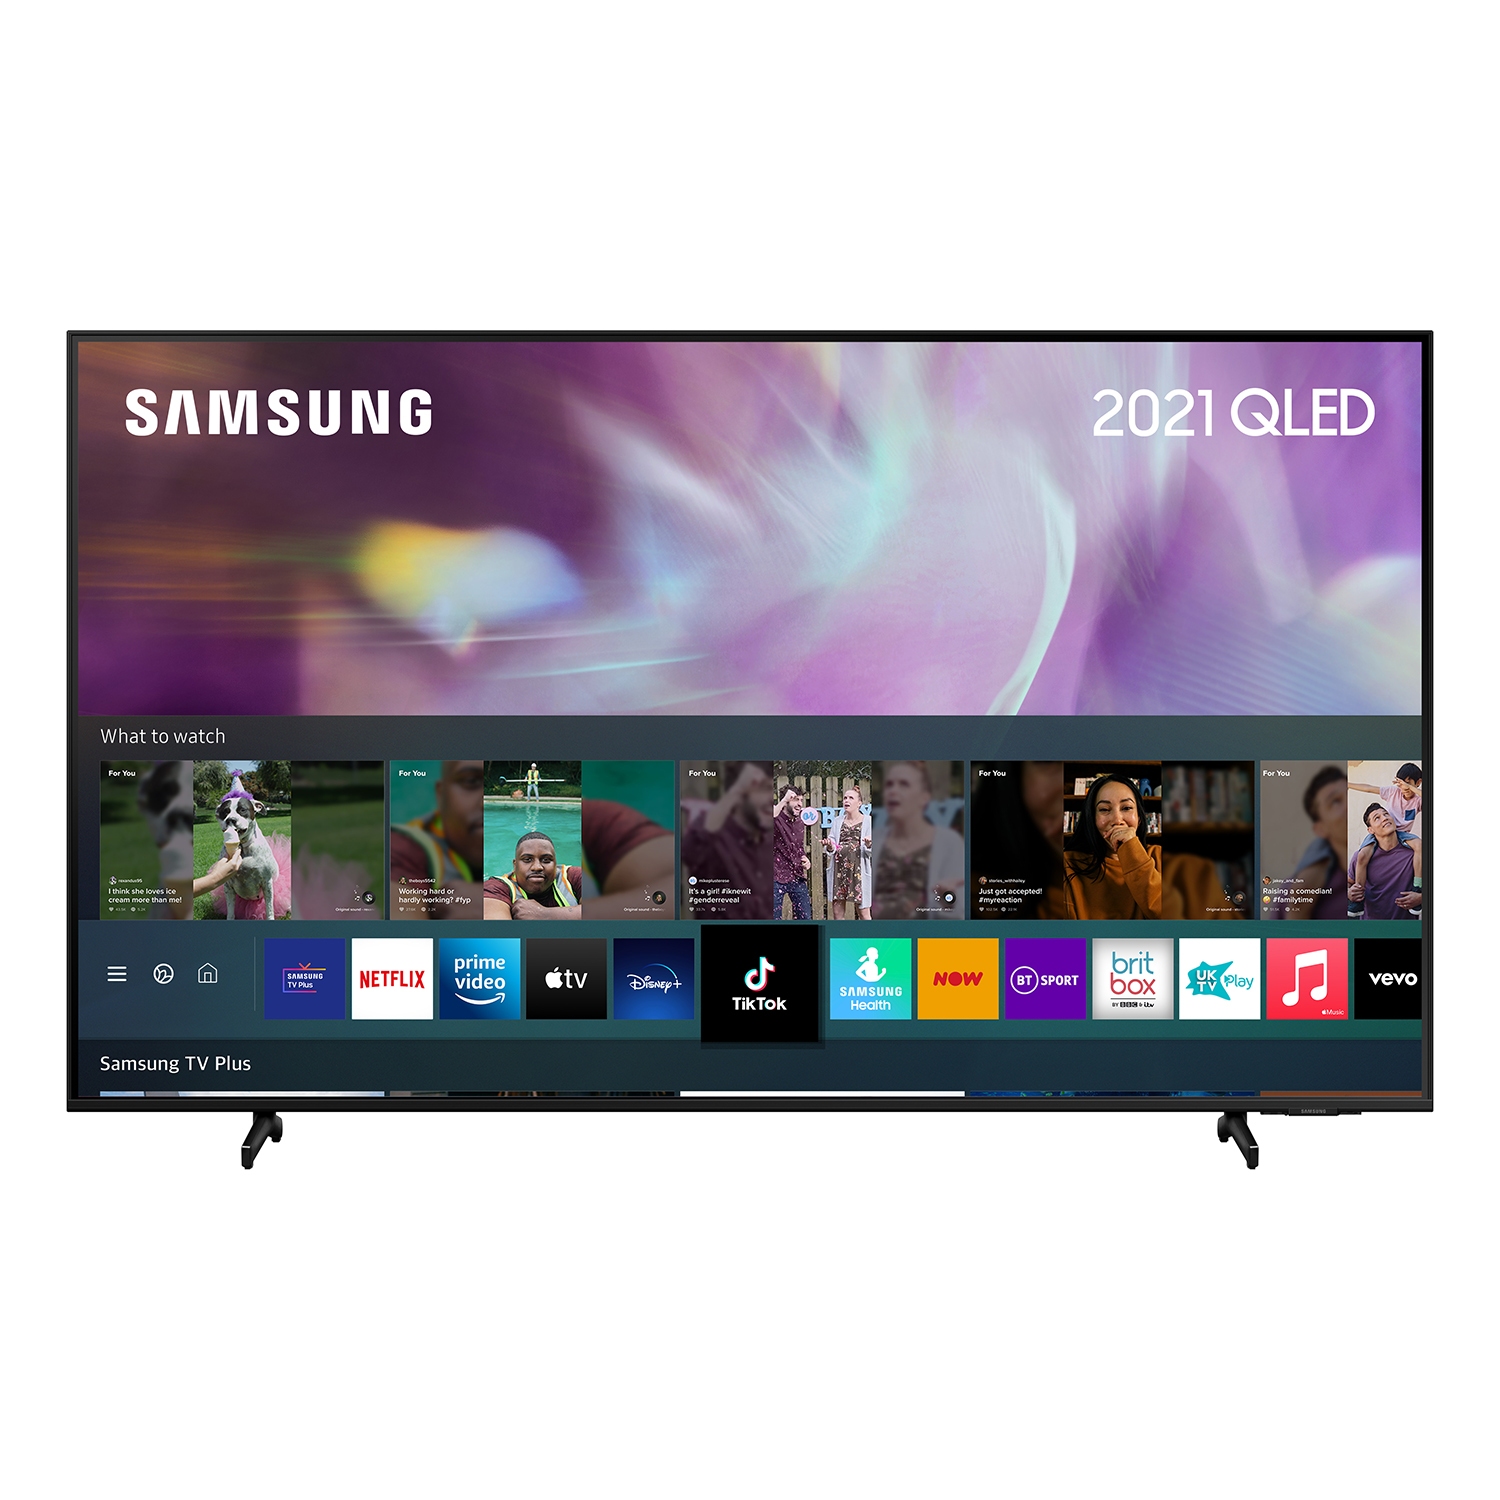 Samsung QE75Q60AAUXXU 75" 4K QLED Smart TV Quantum HDR powered by HDR10+ Object Tracking Sound LITE with Adaptive Sound - 0